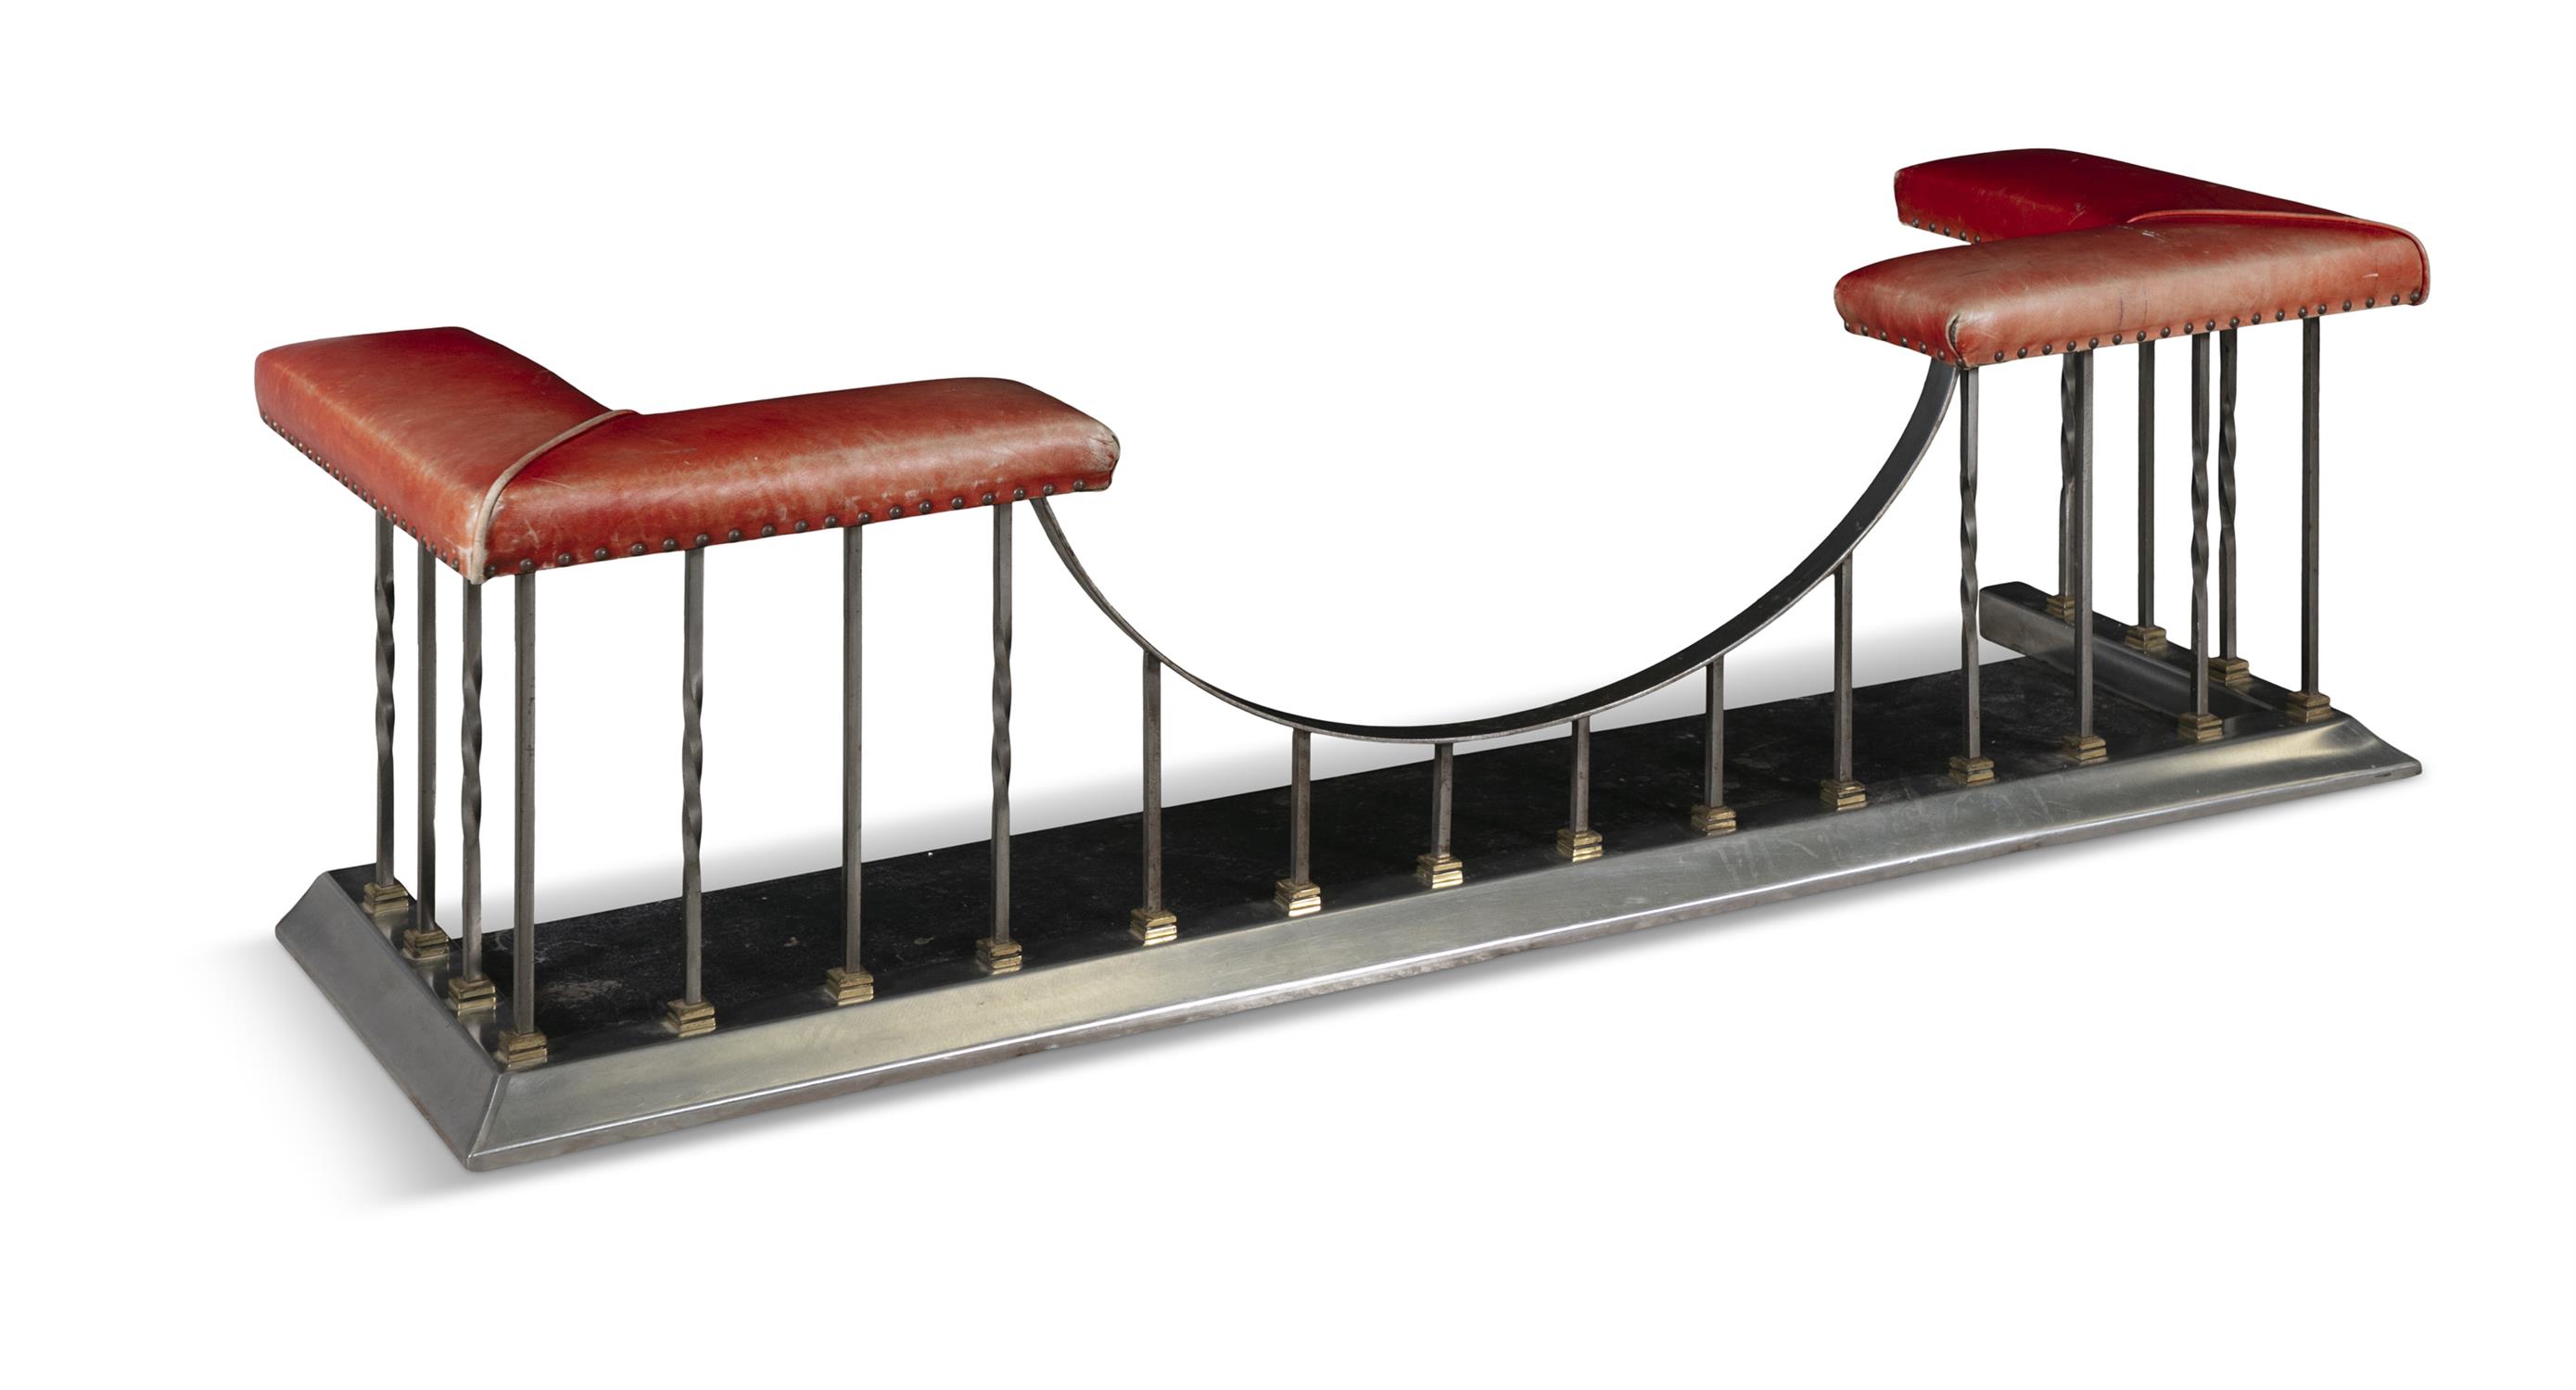 A 20TH CENTURY STEEL FRAME CLUB FENDER, with close nail padded seats, upholstered in red